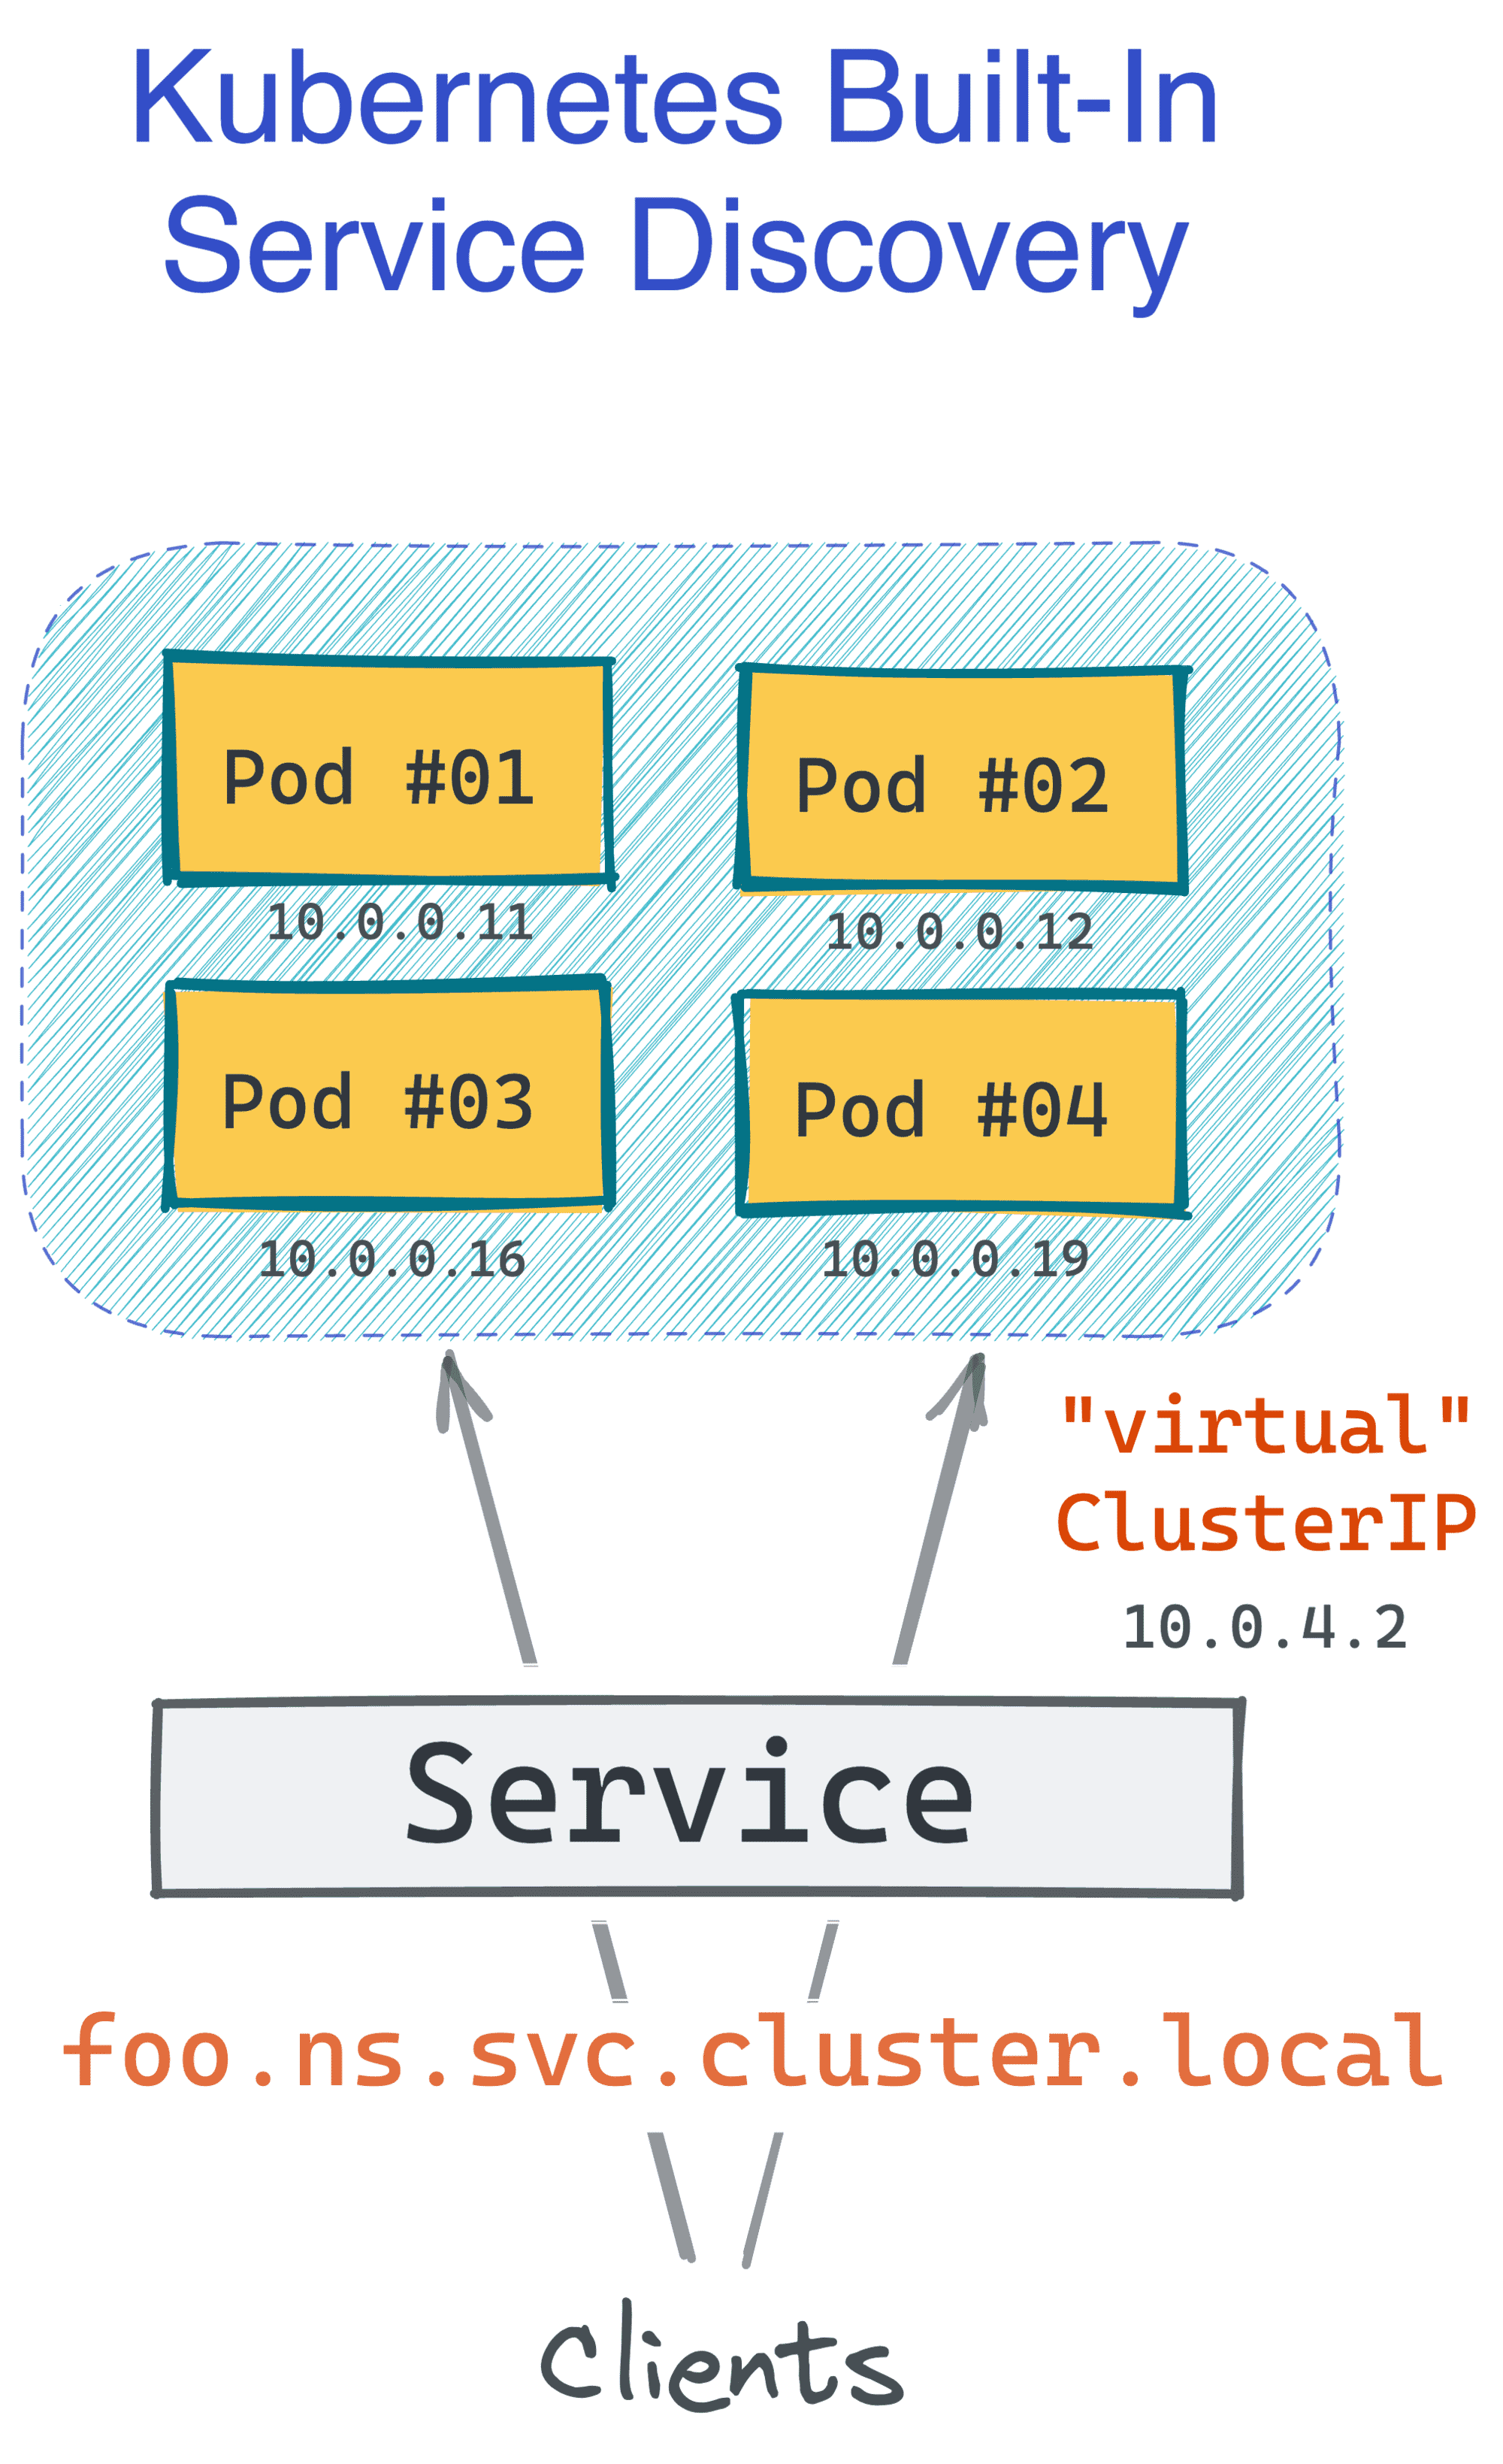 Kubernetes Service - a named group of Pods.